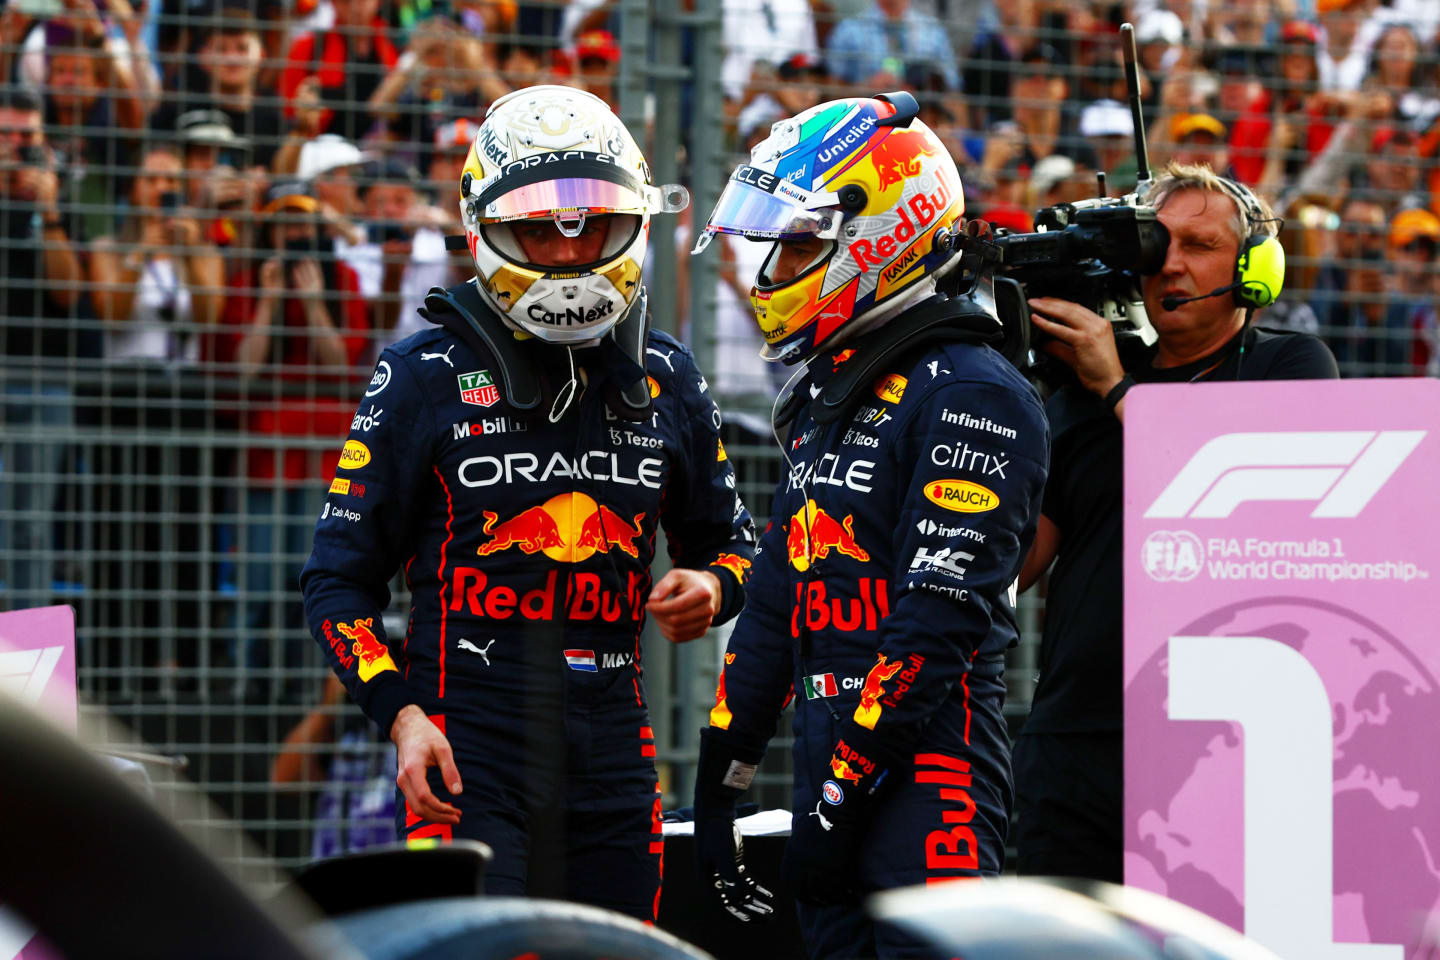 MELBOURNE, AUSTRALIA - APRIL 09: Second placed qualifier Max Verstappen of the Netherlands and Oracle Red Bull Racing and Third placed qualifier Sergio Perez of Mexico and Oracle Red Bull Racing talk in parc ferme during qualifying ahead of the F1 Grand Prix of Australia at Melbourne Grand Prix Circuit on April 09, 2022 in Melbourne, Australia. (Photo by Mark Thompson/Getty Images)